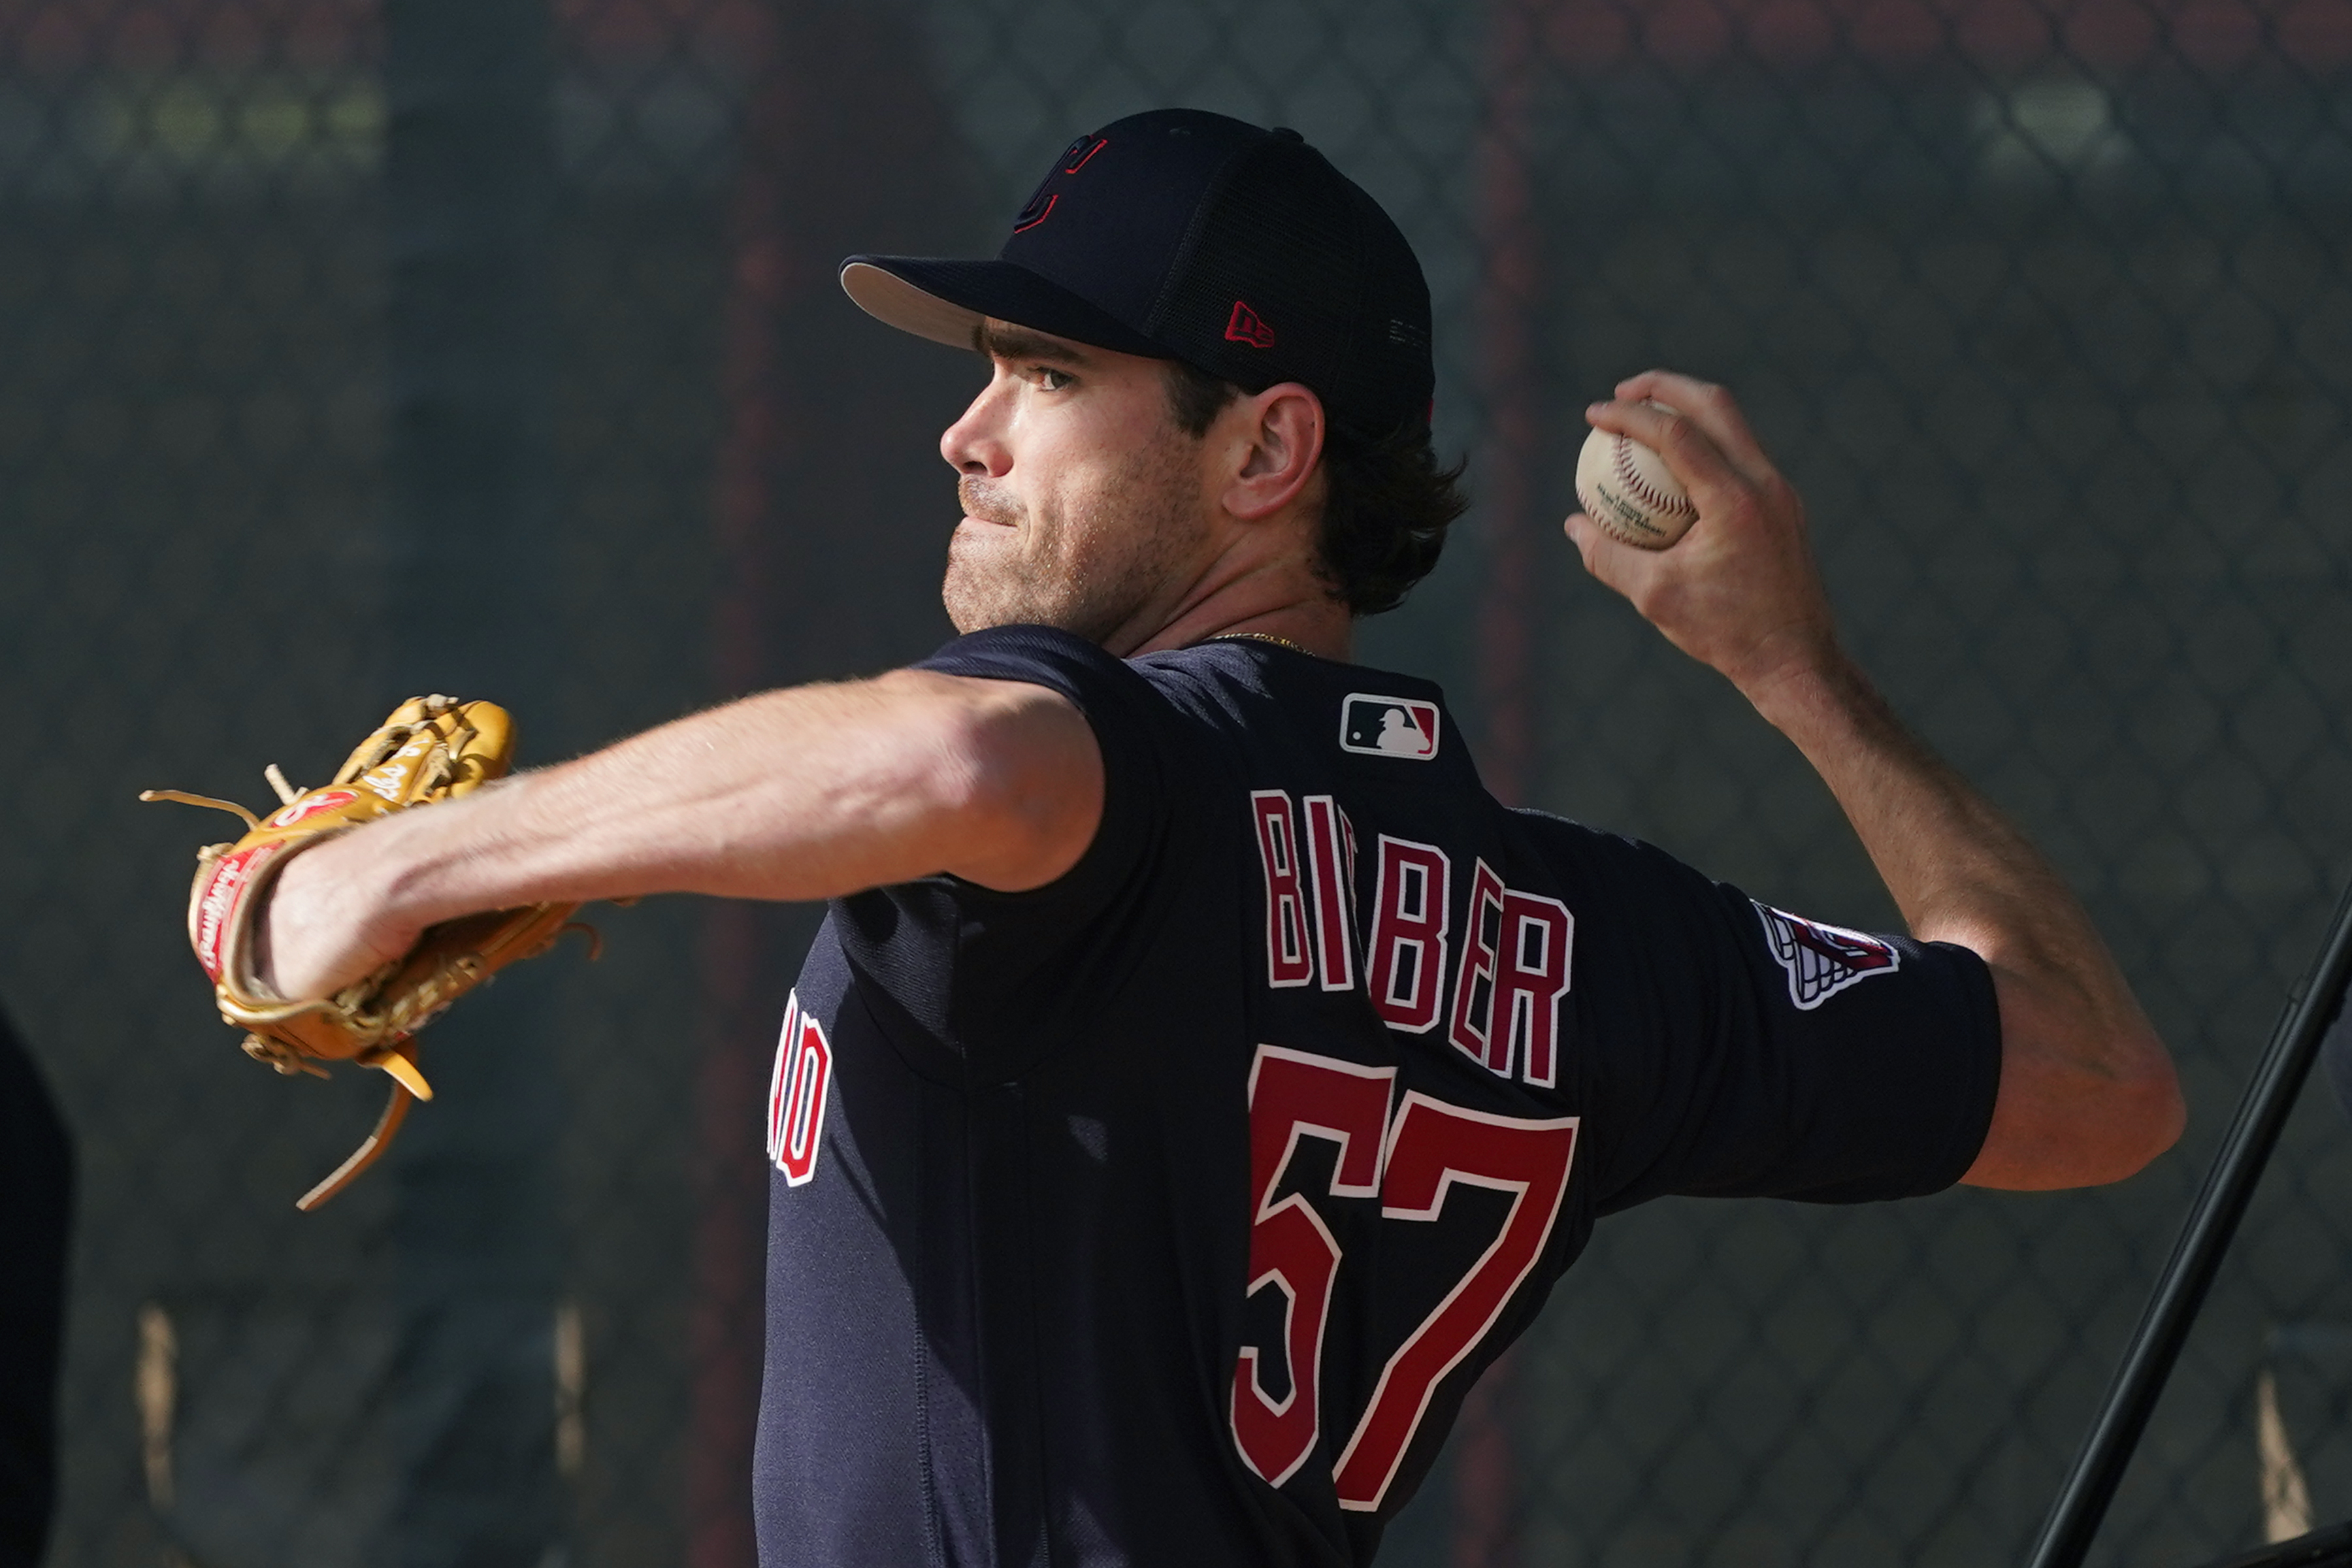 Shane Bieber throws 57 pitches, strikes out four in rehab start